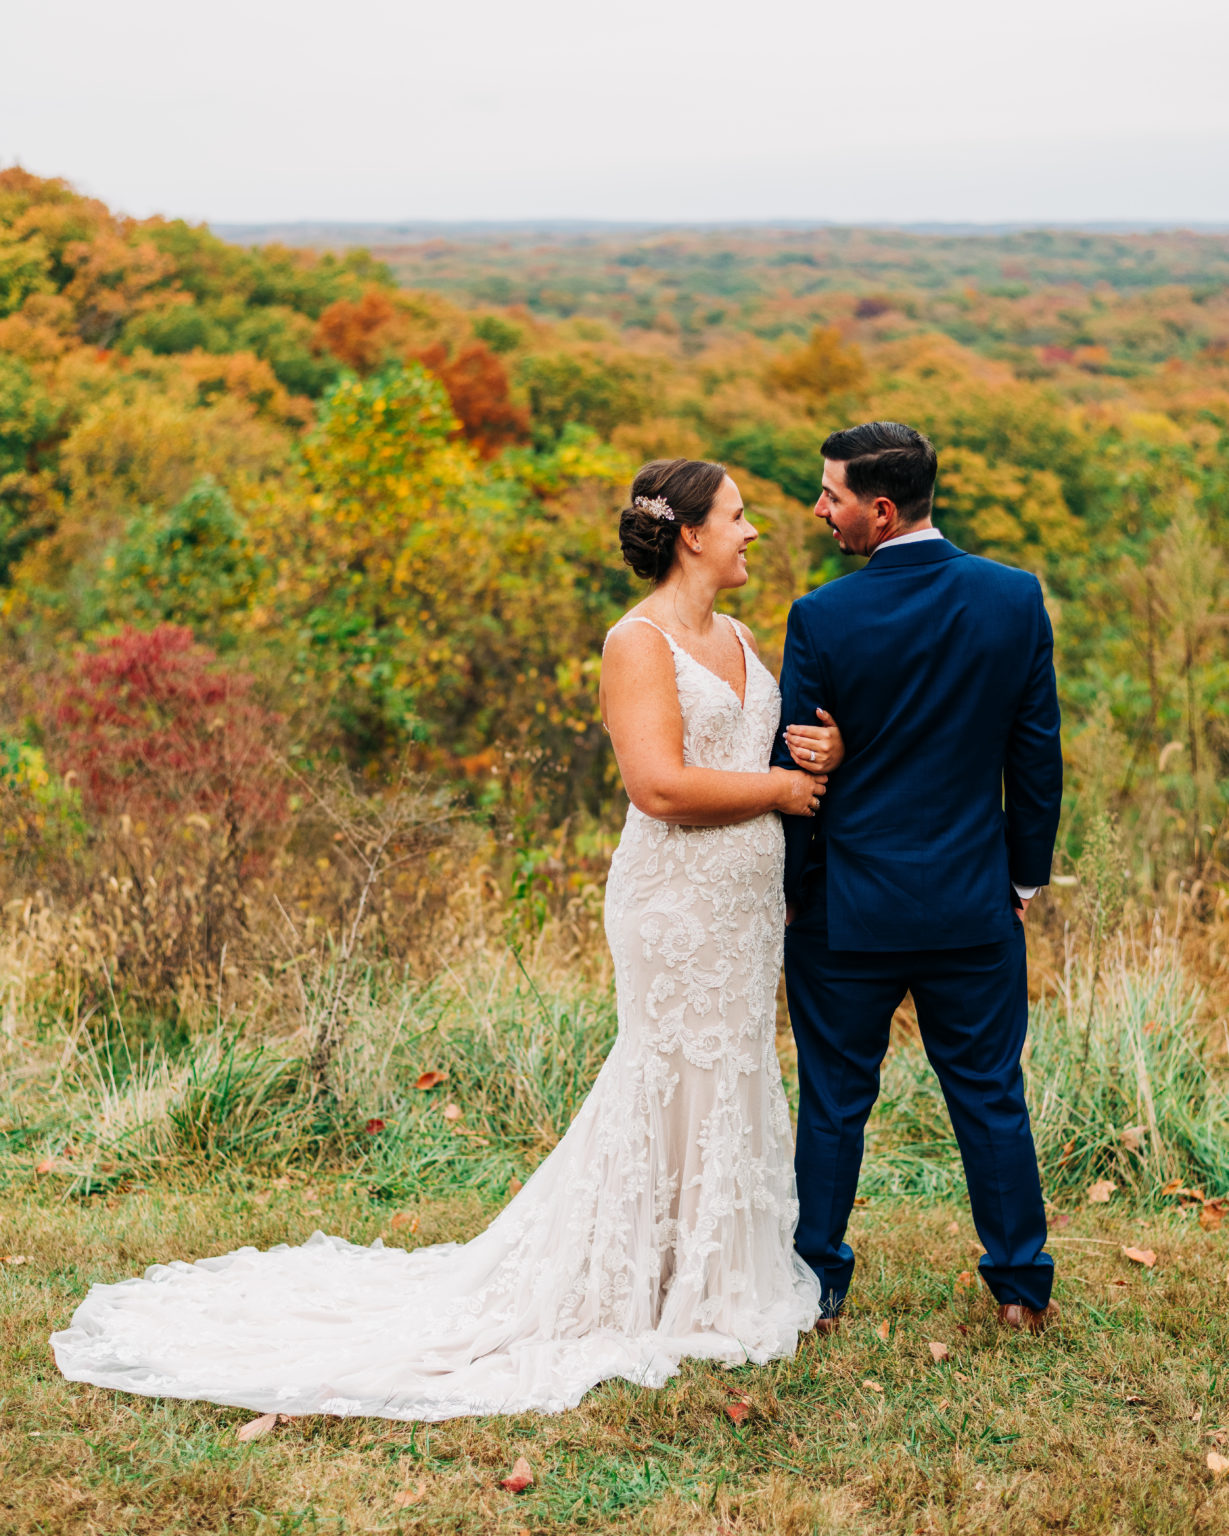 Tips For A Fall Wedding in Brown County State Park - mikalh.com